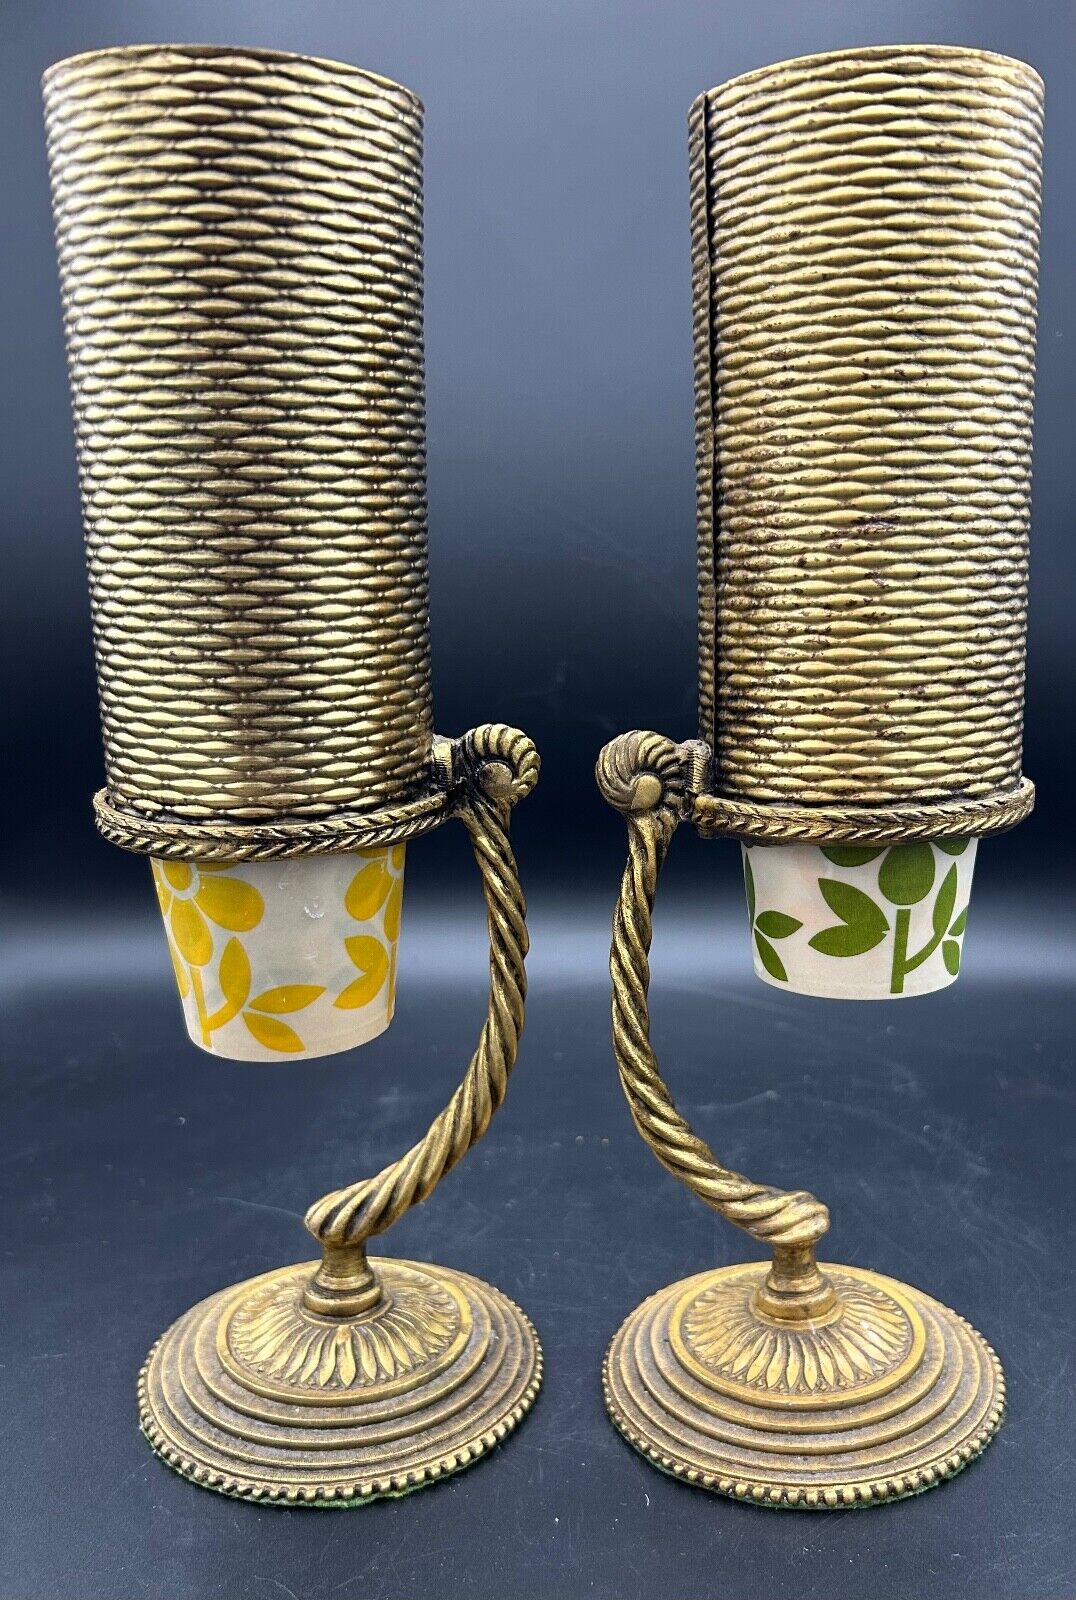 Vintage Brass / Gold Tone Dixie Cup Dispenser Yours and Mine (set of 2)